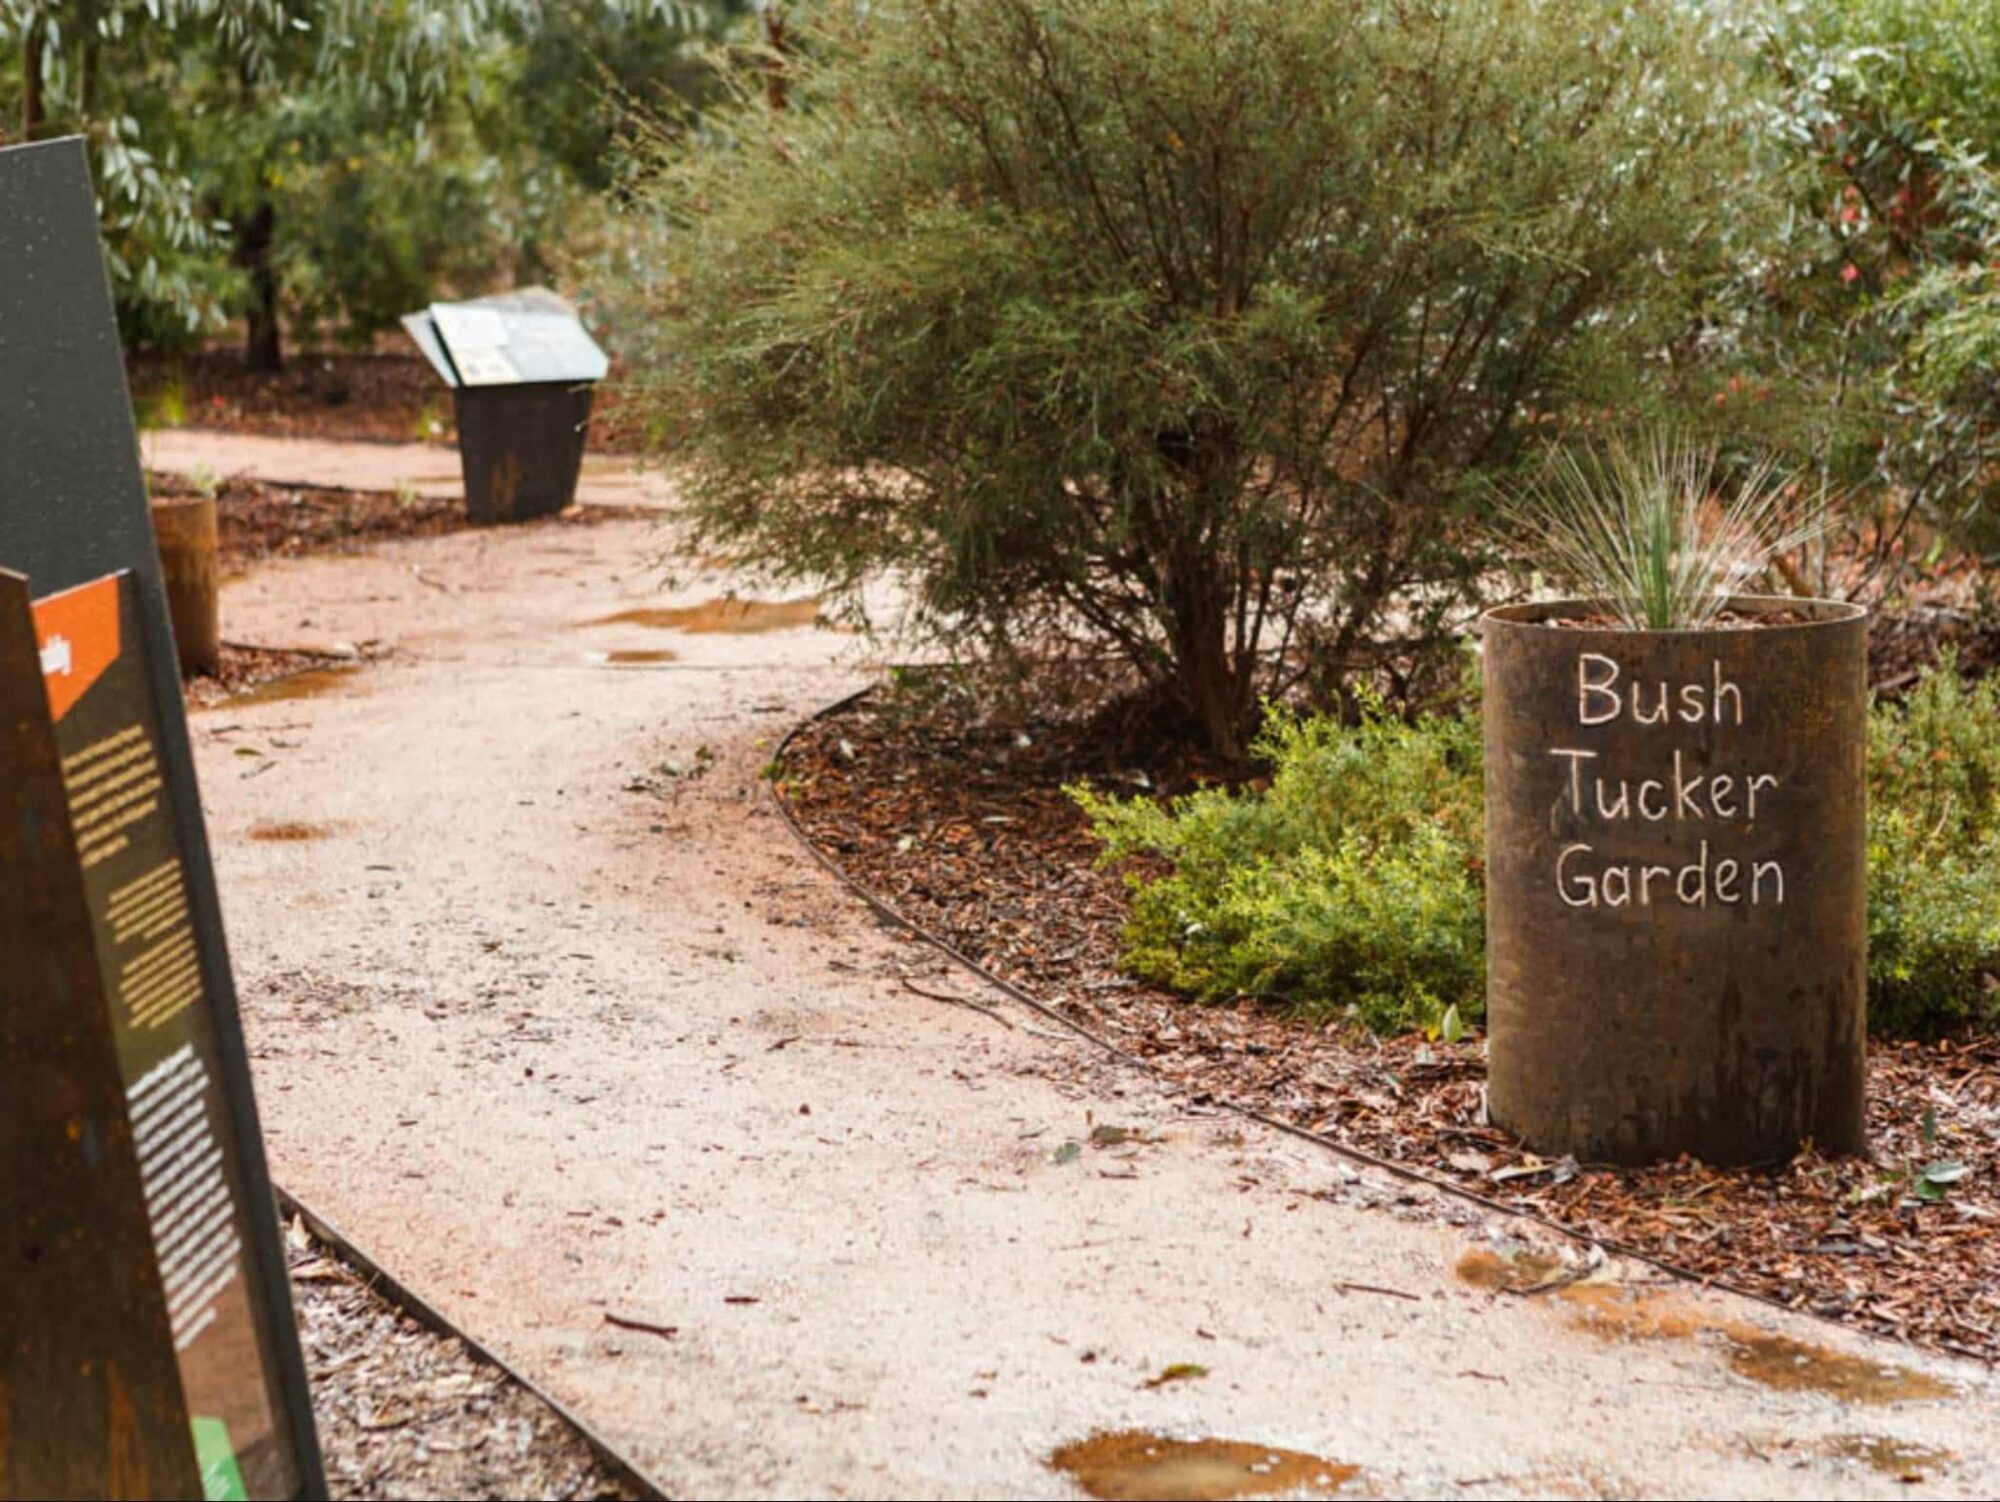 Bush Tucker Garden sign and entrance, dirt track, native plants and trees